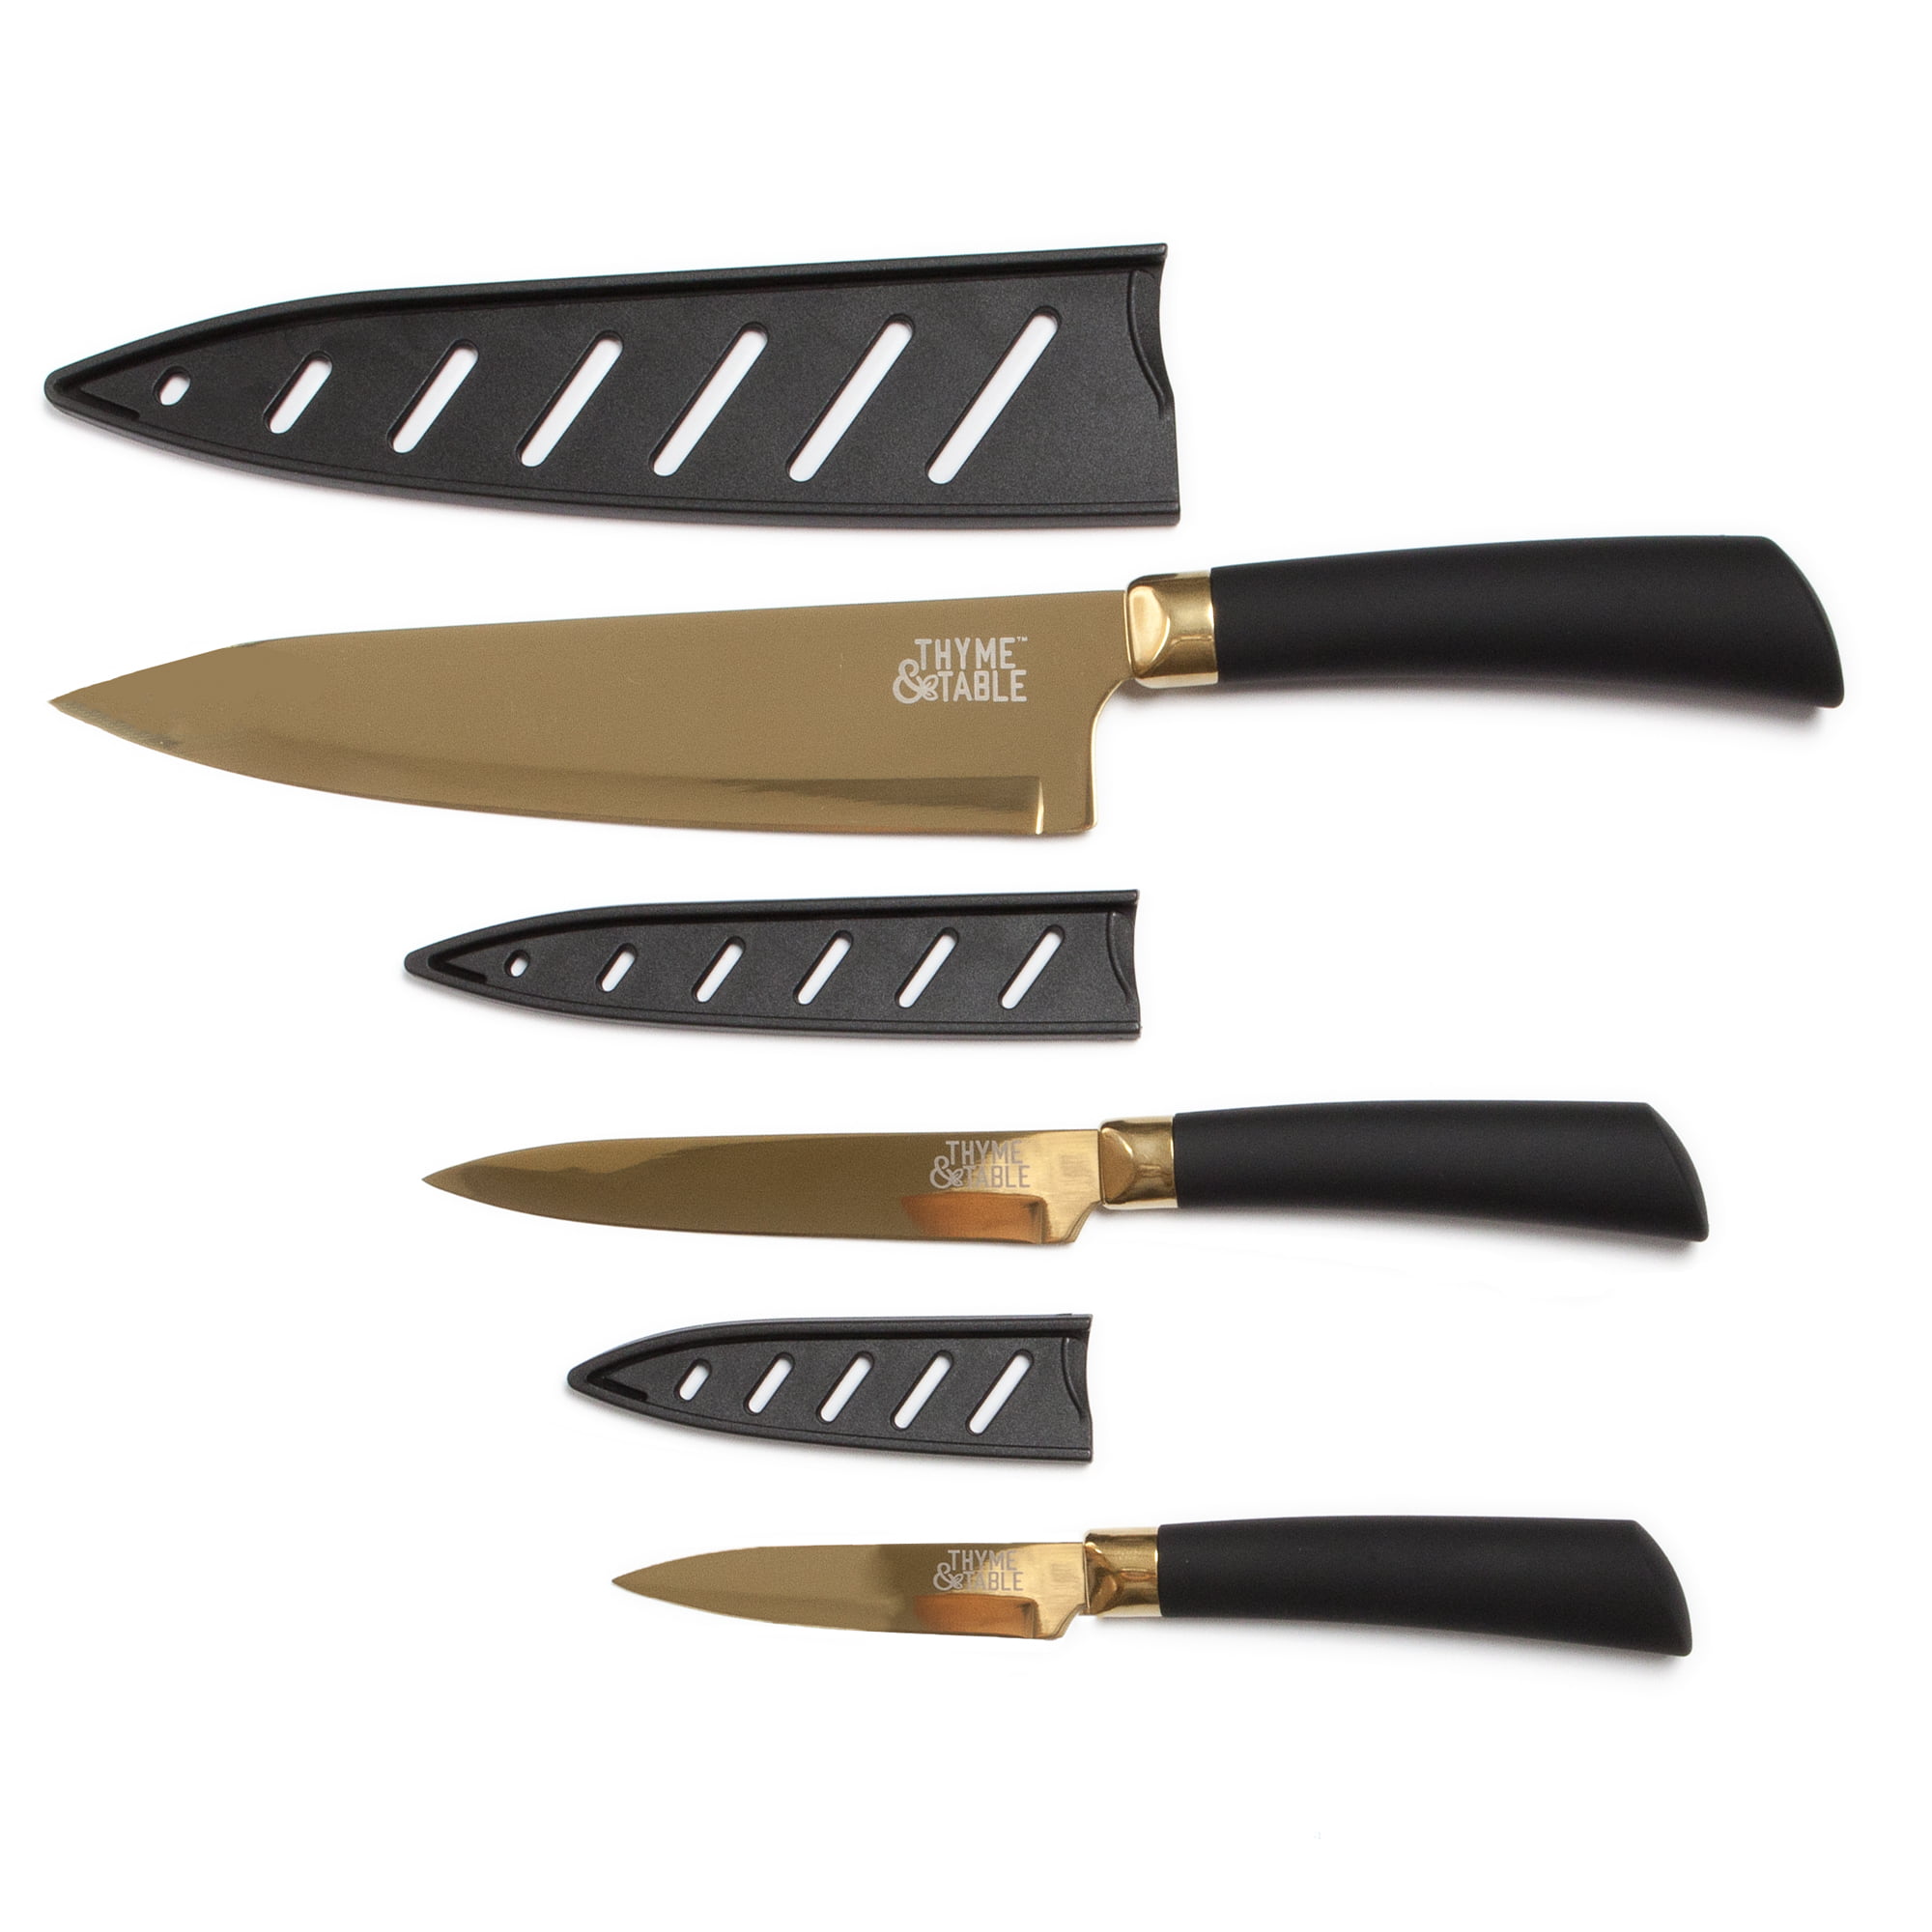 Oh So Aussie PH - Thyme & Table 3-piece Knife Set 